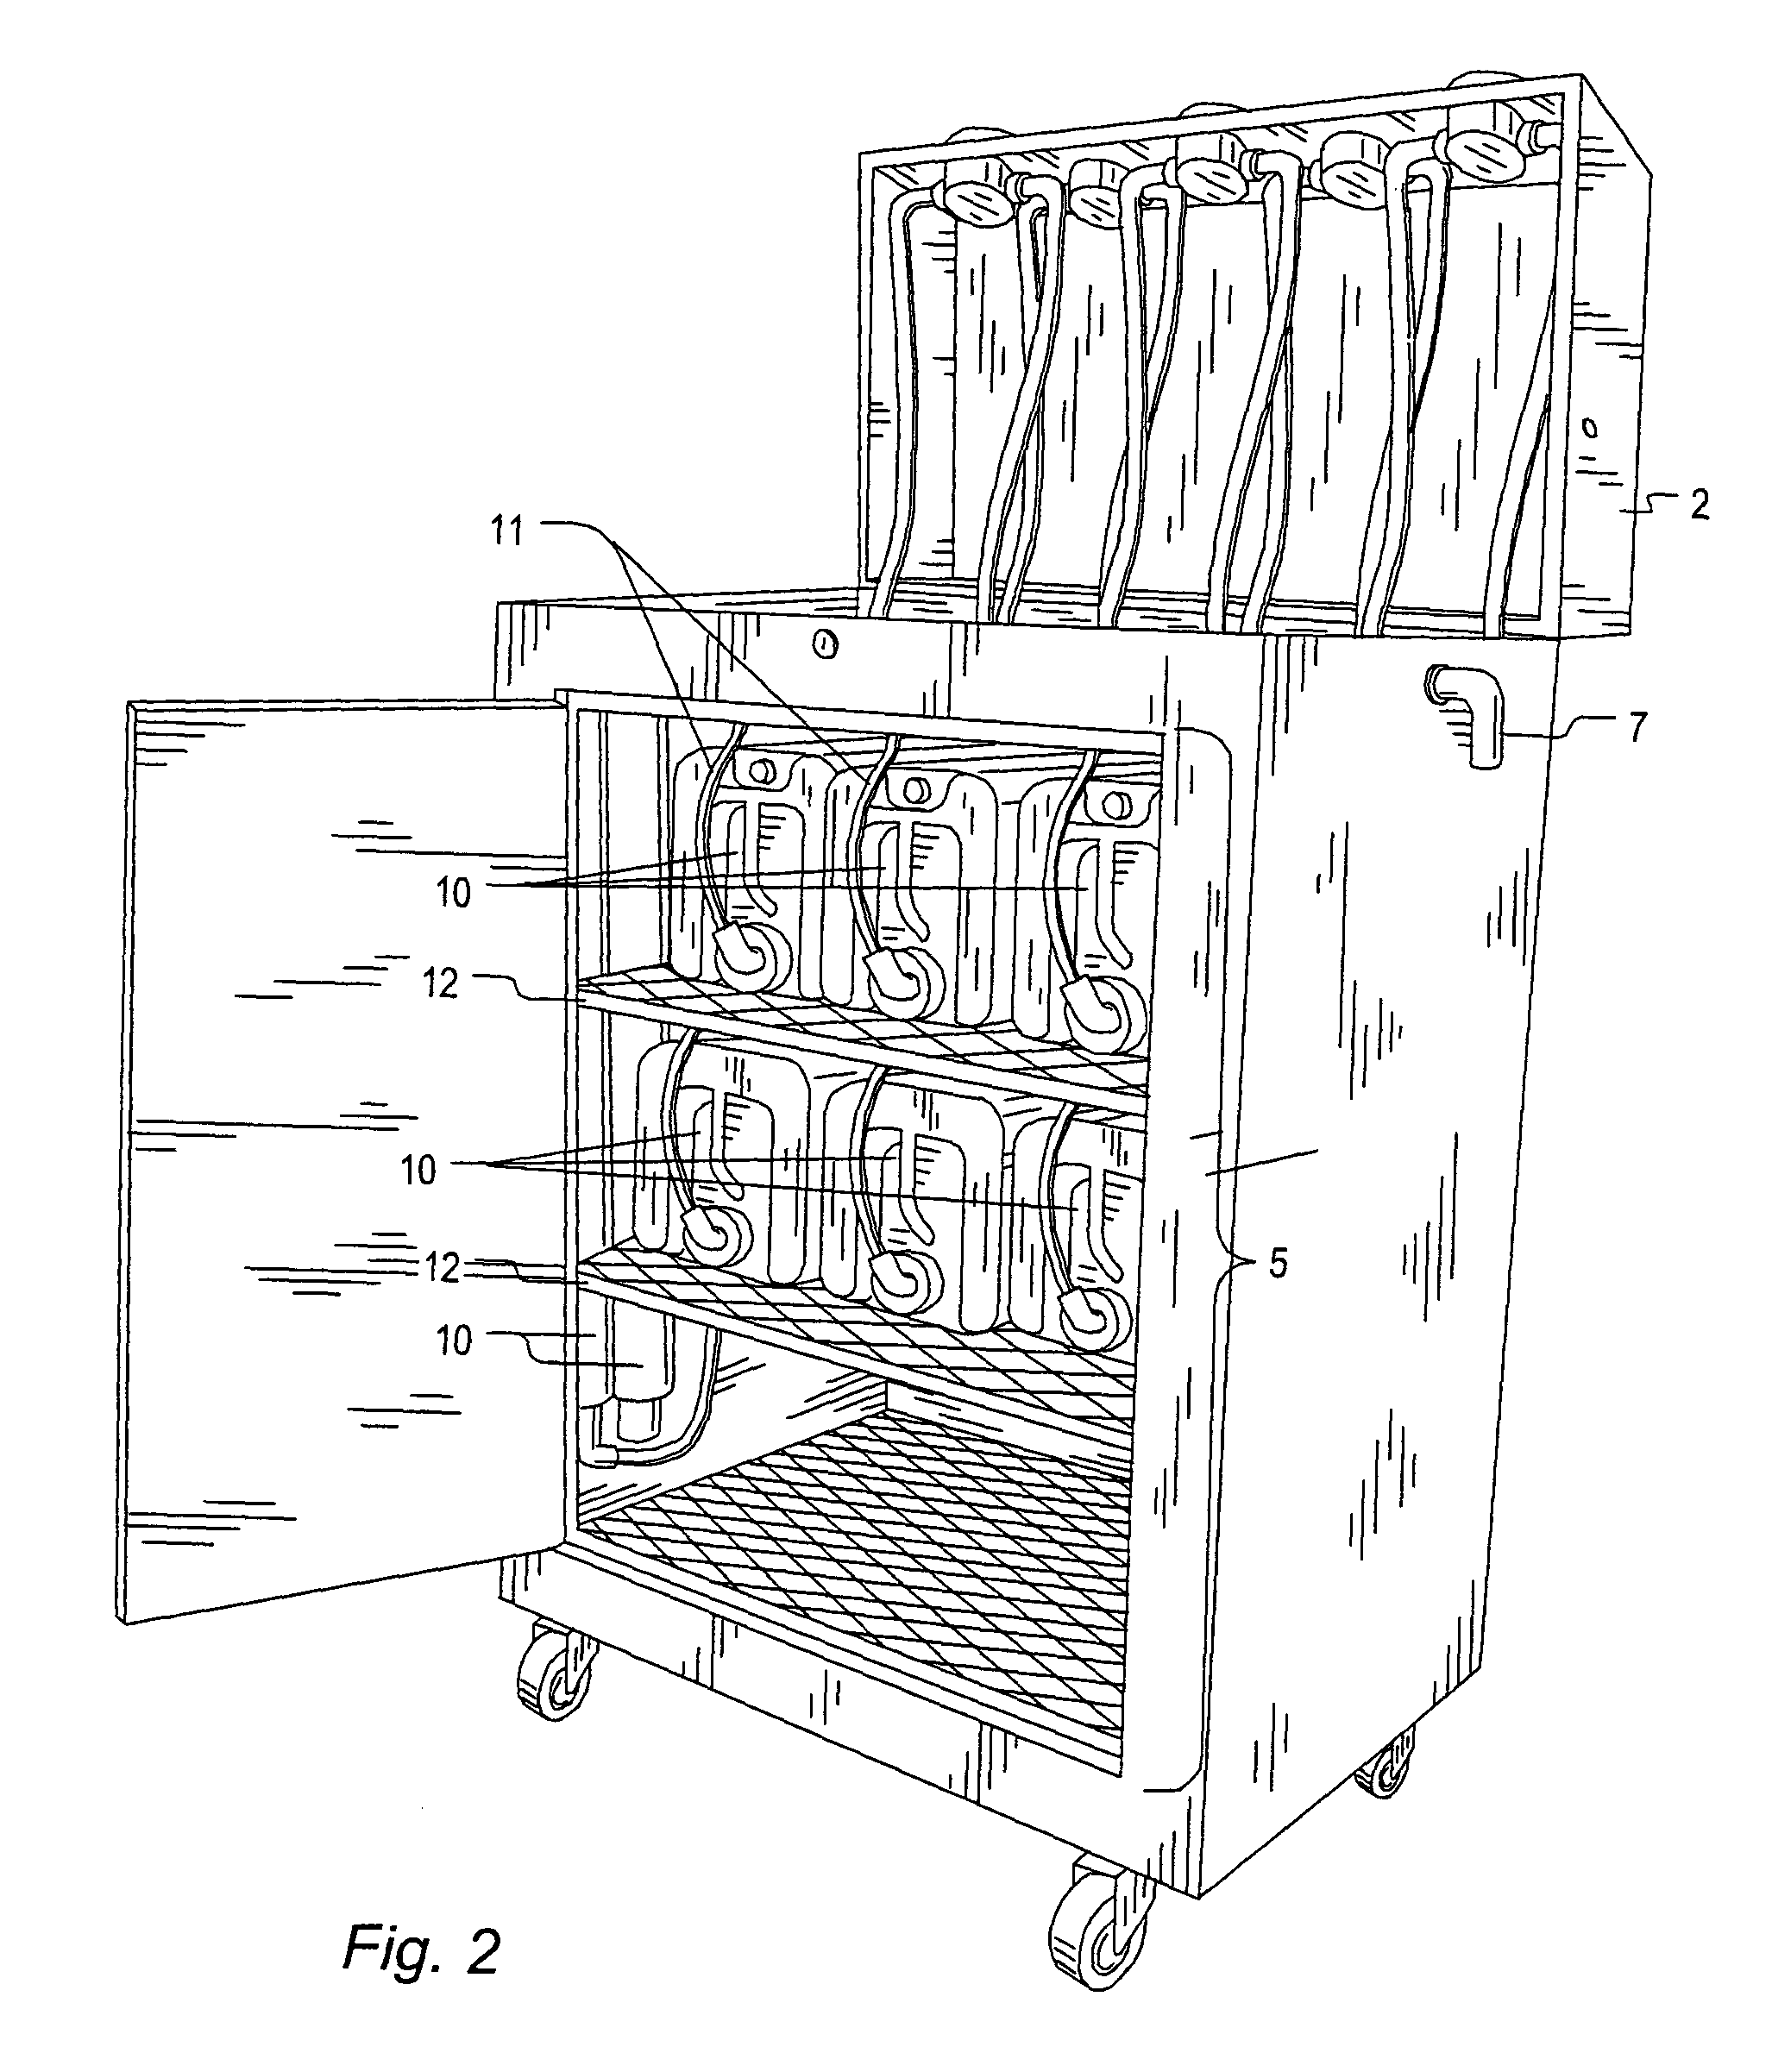 Apparatus and methods for a customer to produce and dispense automobile appearance care products